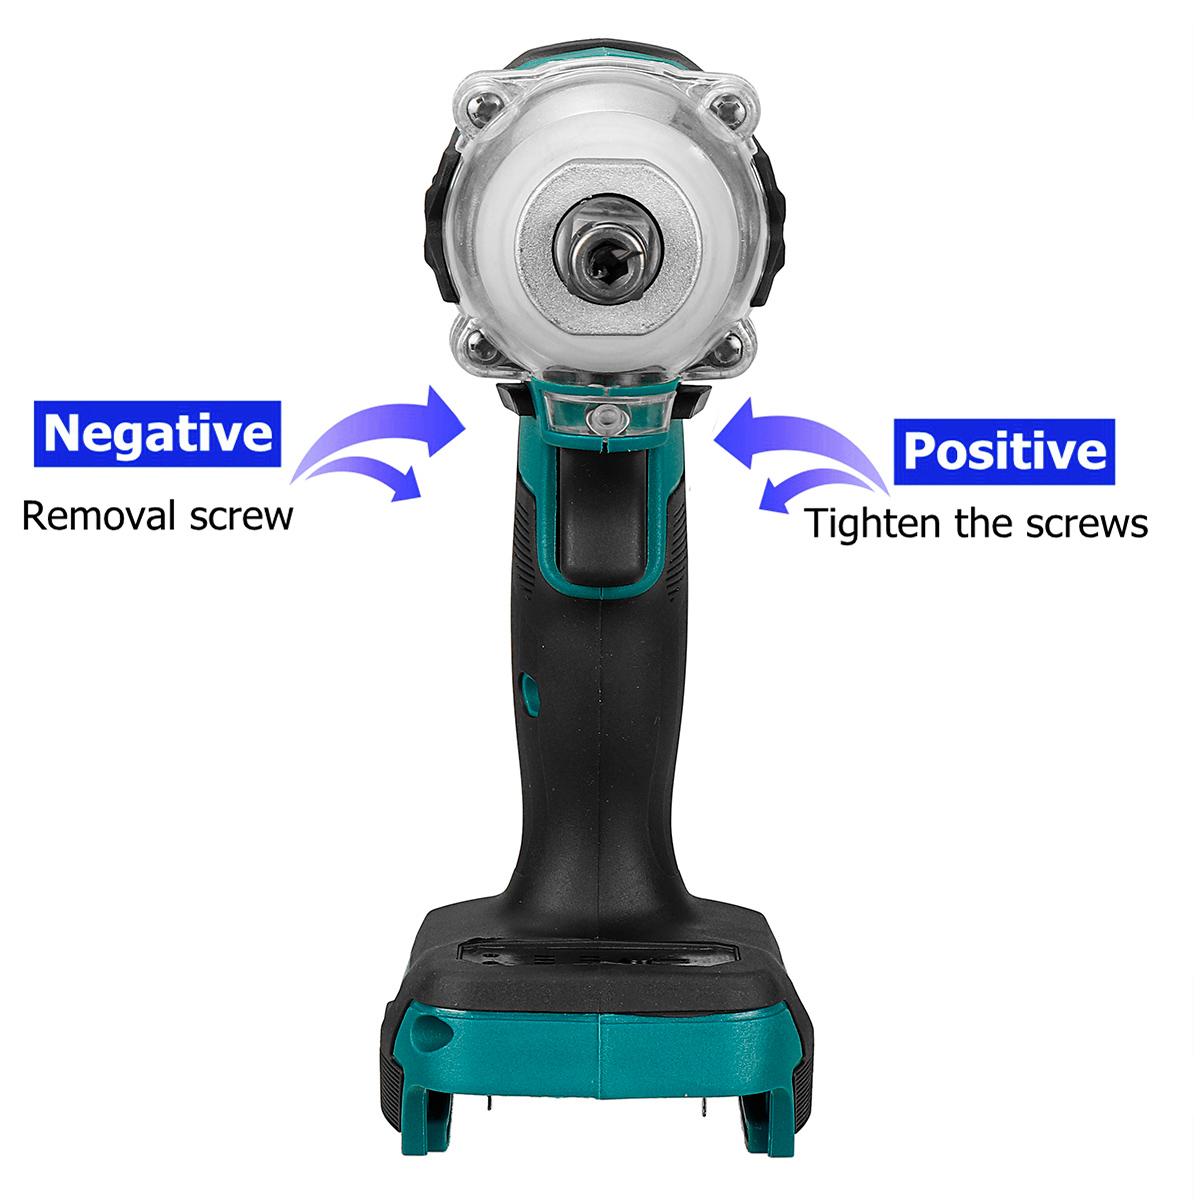 125mm-Cordless-Brushless-Impact-Wrench-Drill-Drive-Screwdriver-Power-Tool-For-Makita-18V-battery-1855969-5